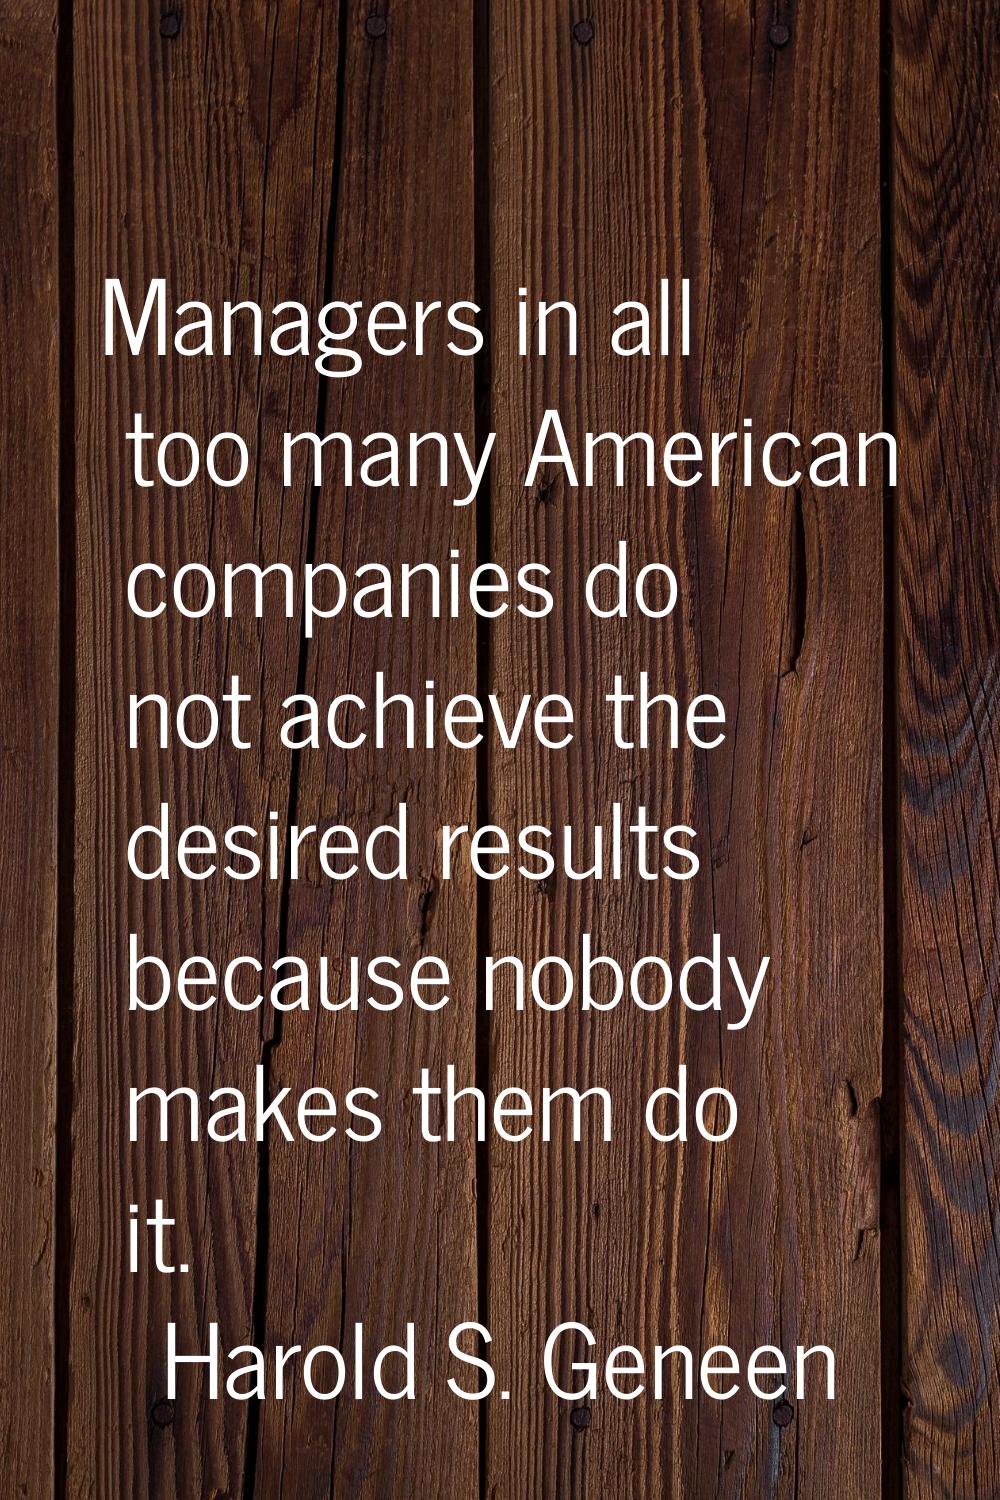 Managers in all too many American companies do not achieve the desired results because nobody makes